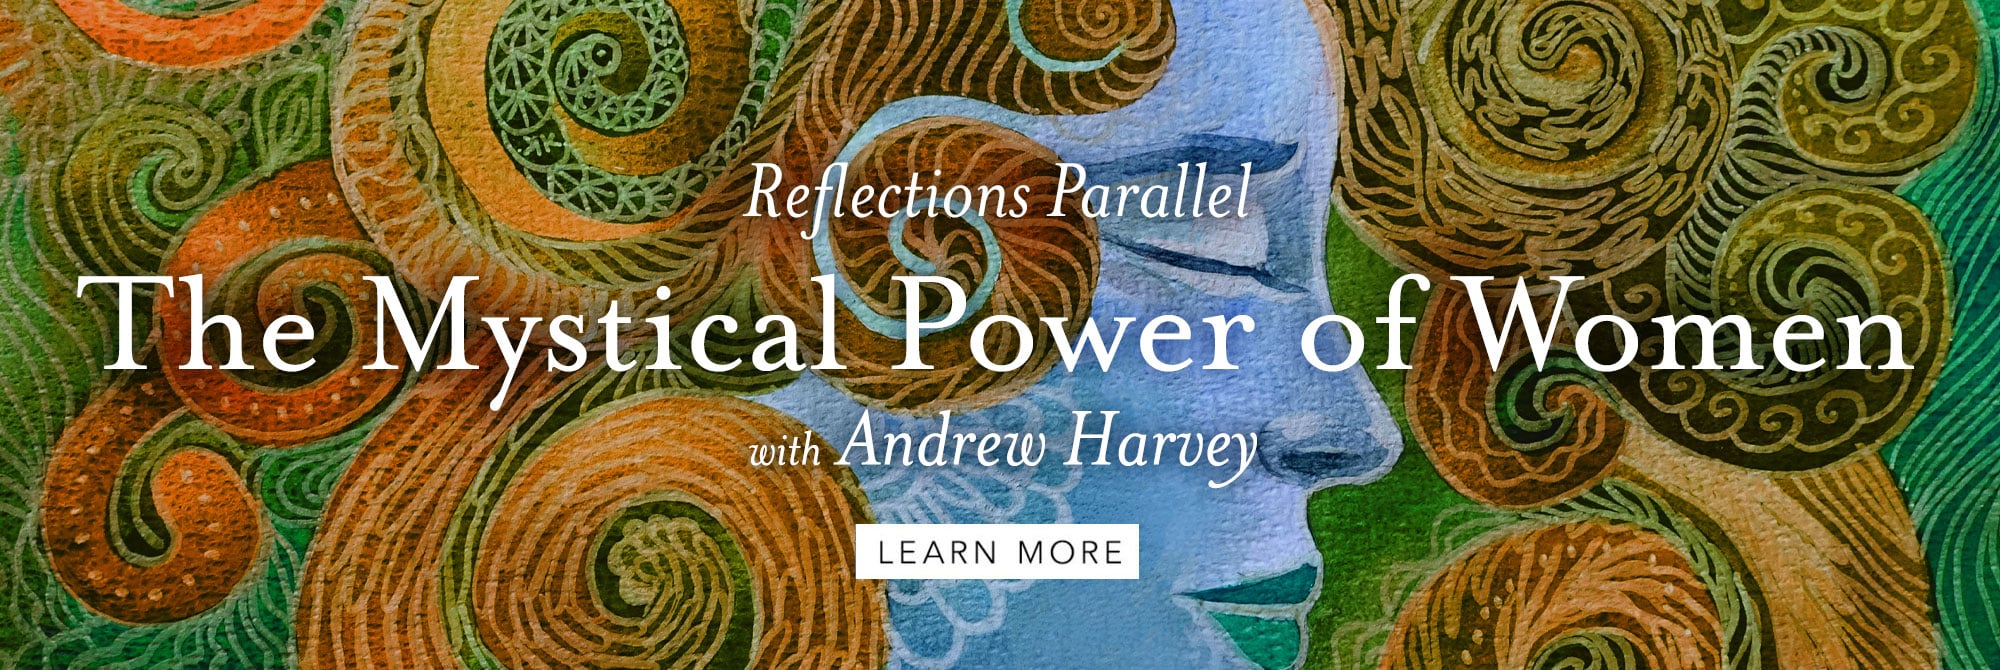 Reflections Parallel: The Mystical Power of Women - with Andrew Harvey